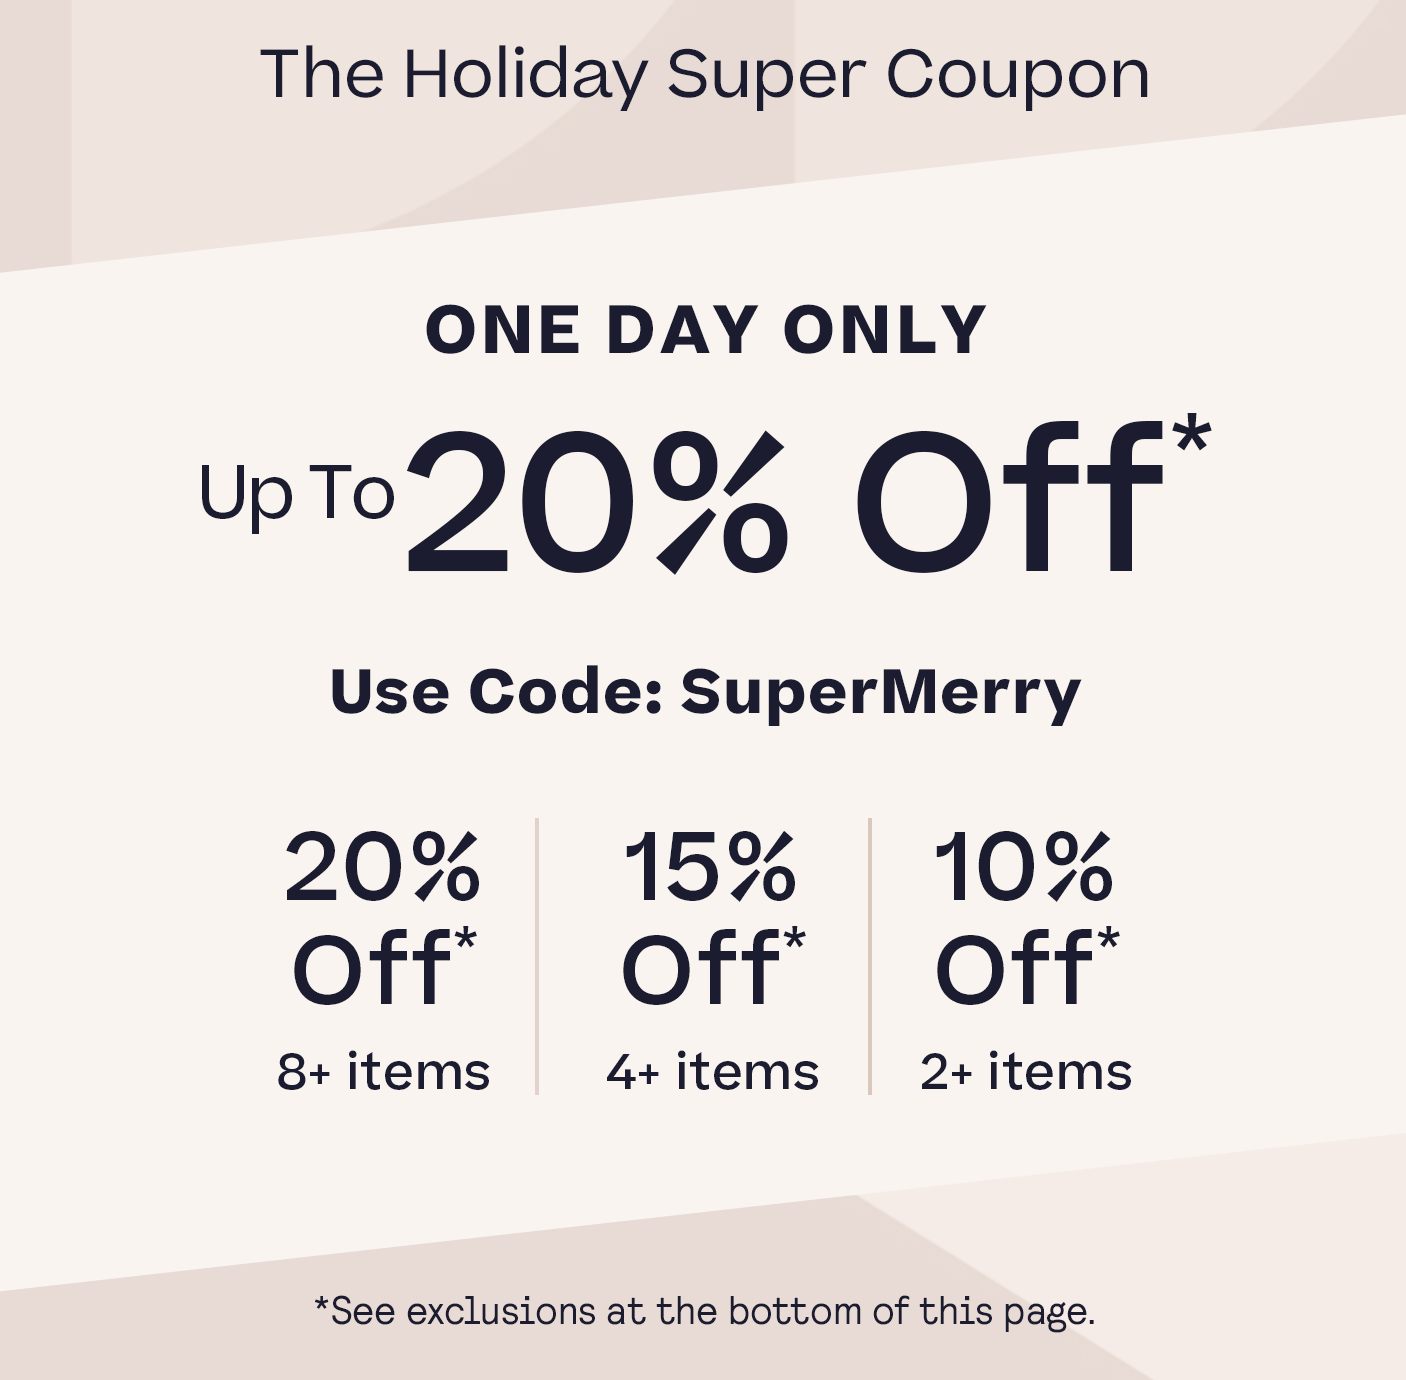 One Day Holiday Super Coupon 20% Off 8+ 15% Off | 4+ 10% Off | 2+ Code:
SuperMerry see exclusions in footer